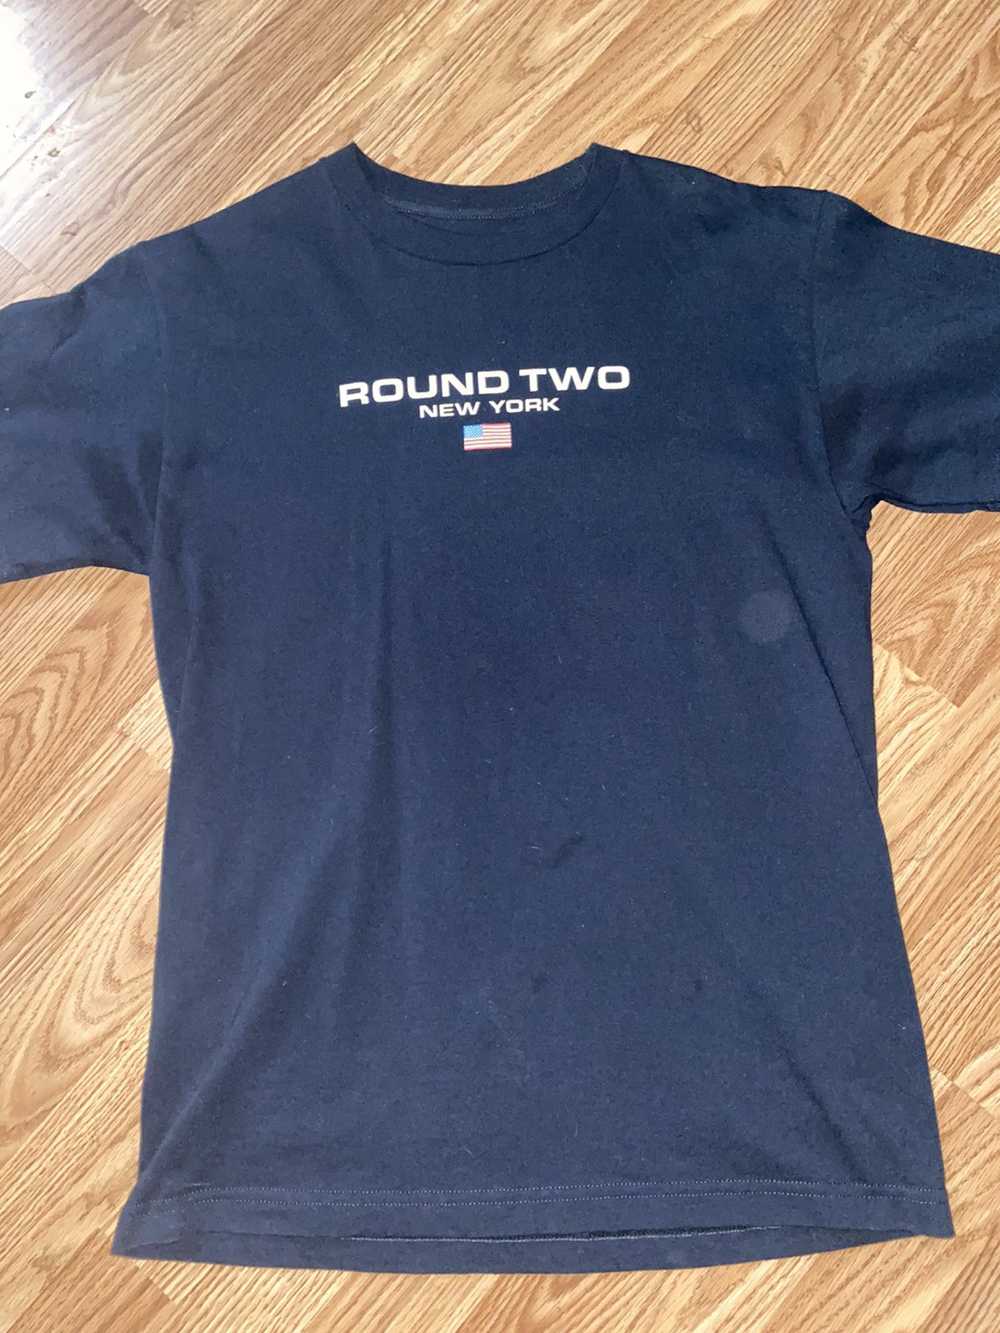 Round Two Round Two NYC Released TShirt - image 1